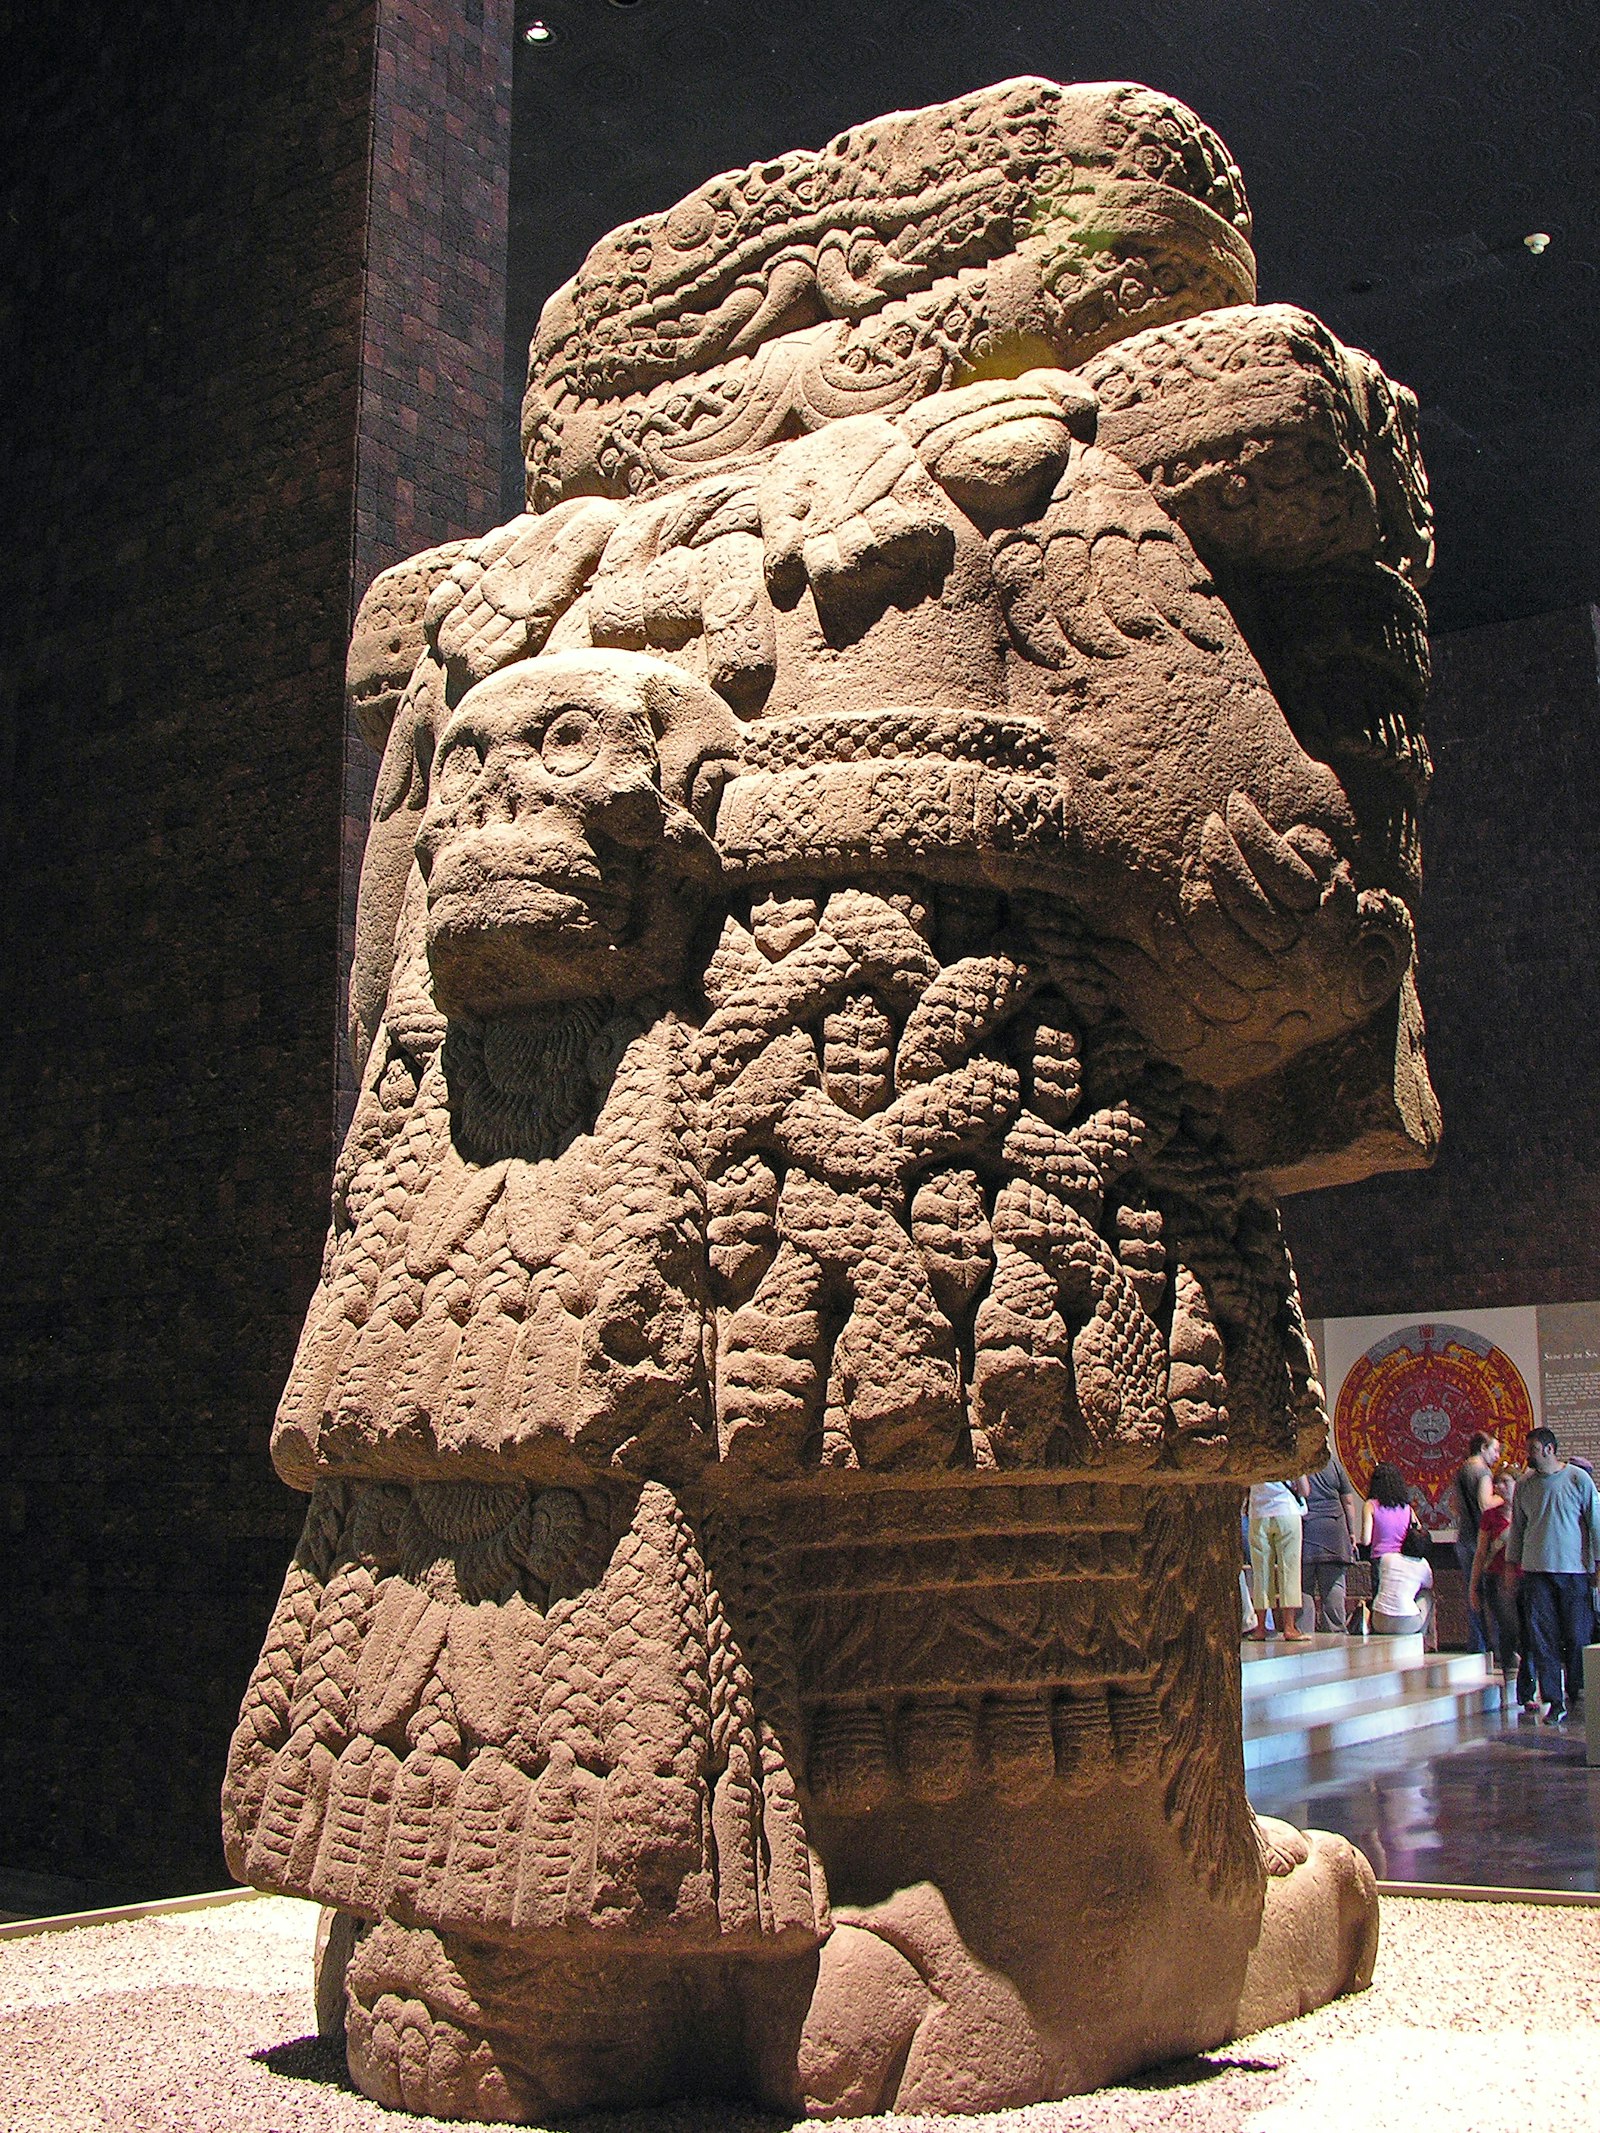 Coatlicue Sculpture National Anthropology Museum Mexico City